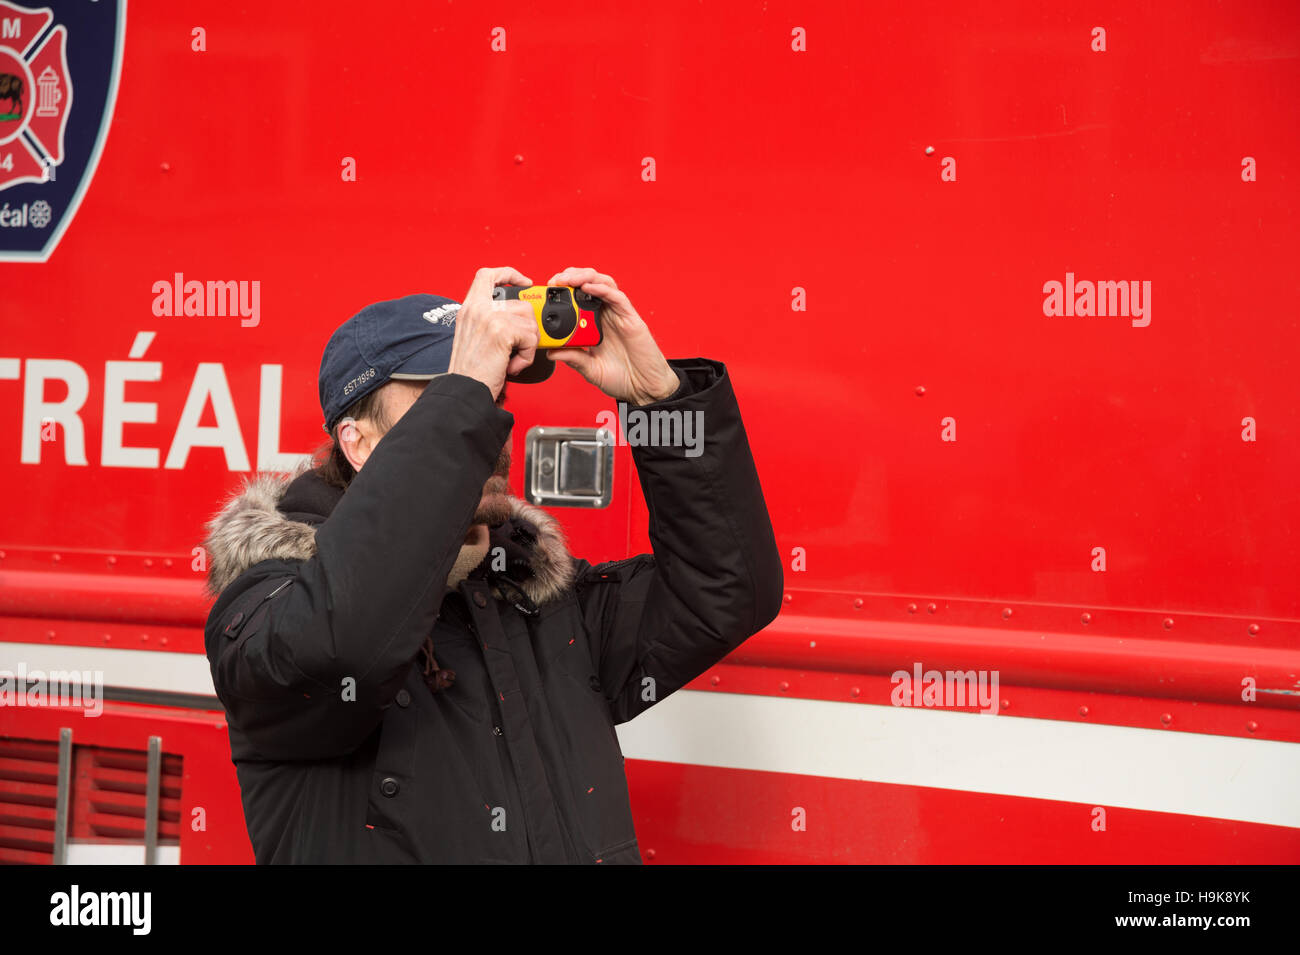 Montreal, CA - 23 Nov 2016: A man is taking pictures of a fire, with a disposable camera, in front of a firetruck Stock Photo